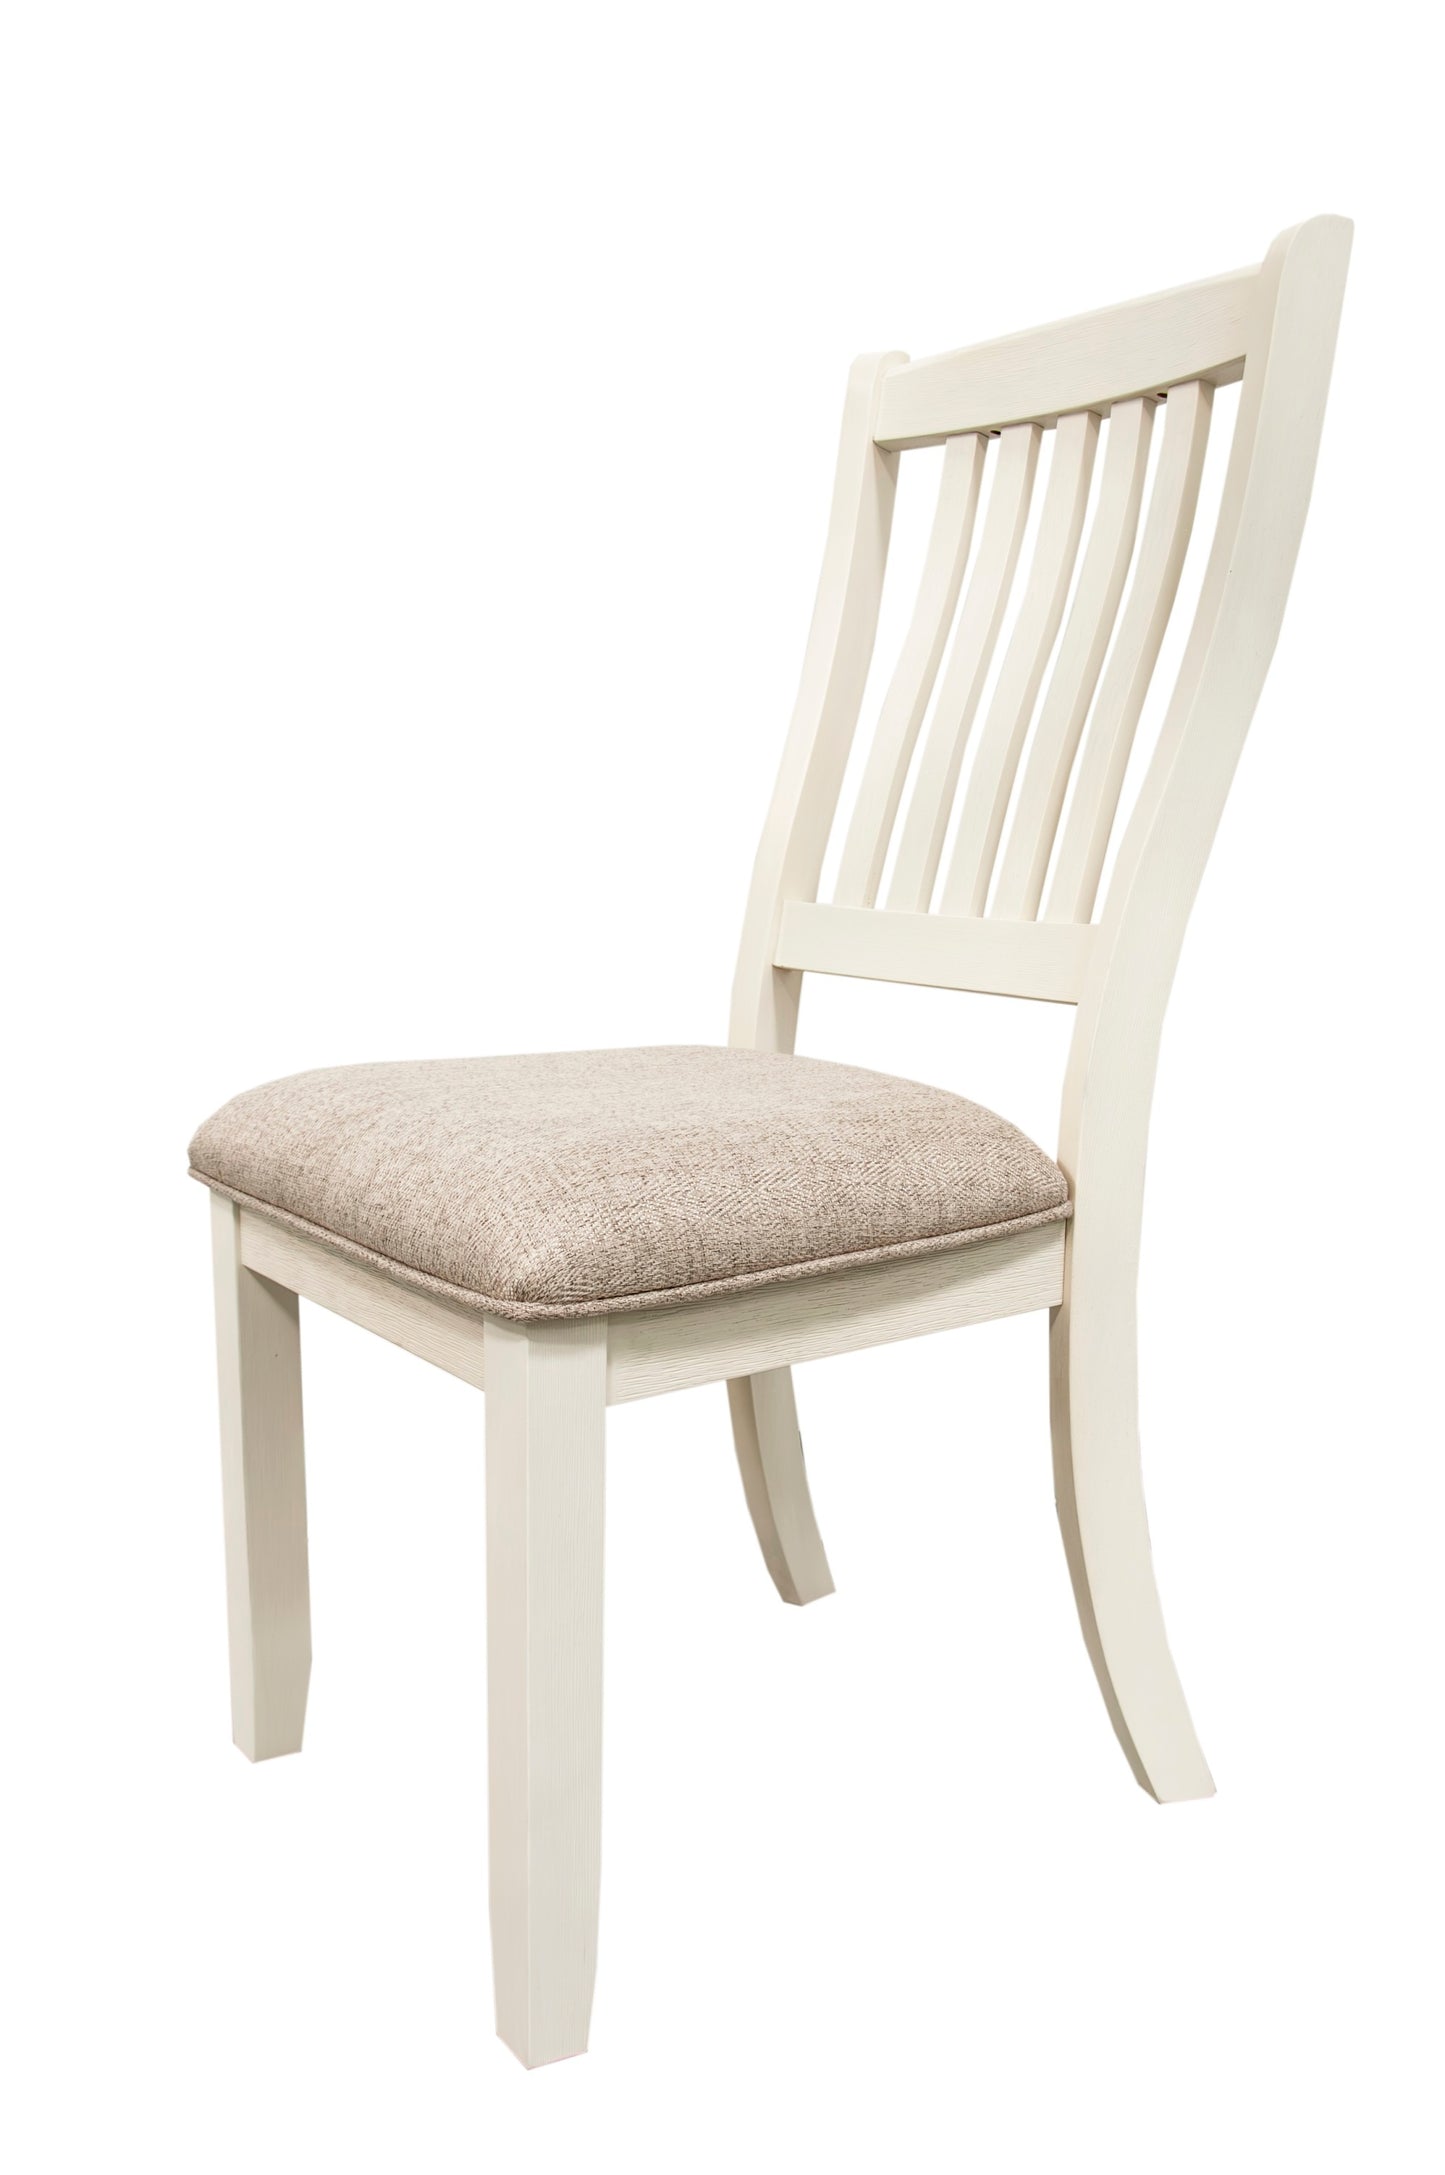 White Classic 2pcs Dining Chairs Set Rubberwood Beige Fabric Cushion Seats Slats Backs Dining Room Furniture Side Chair